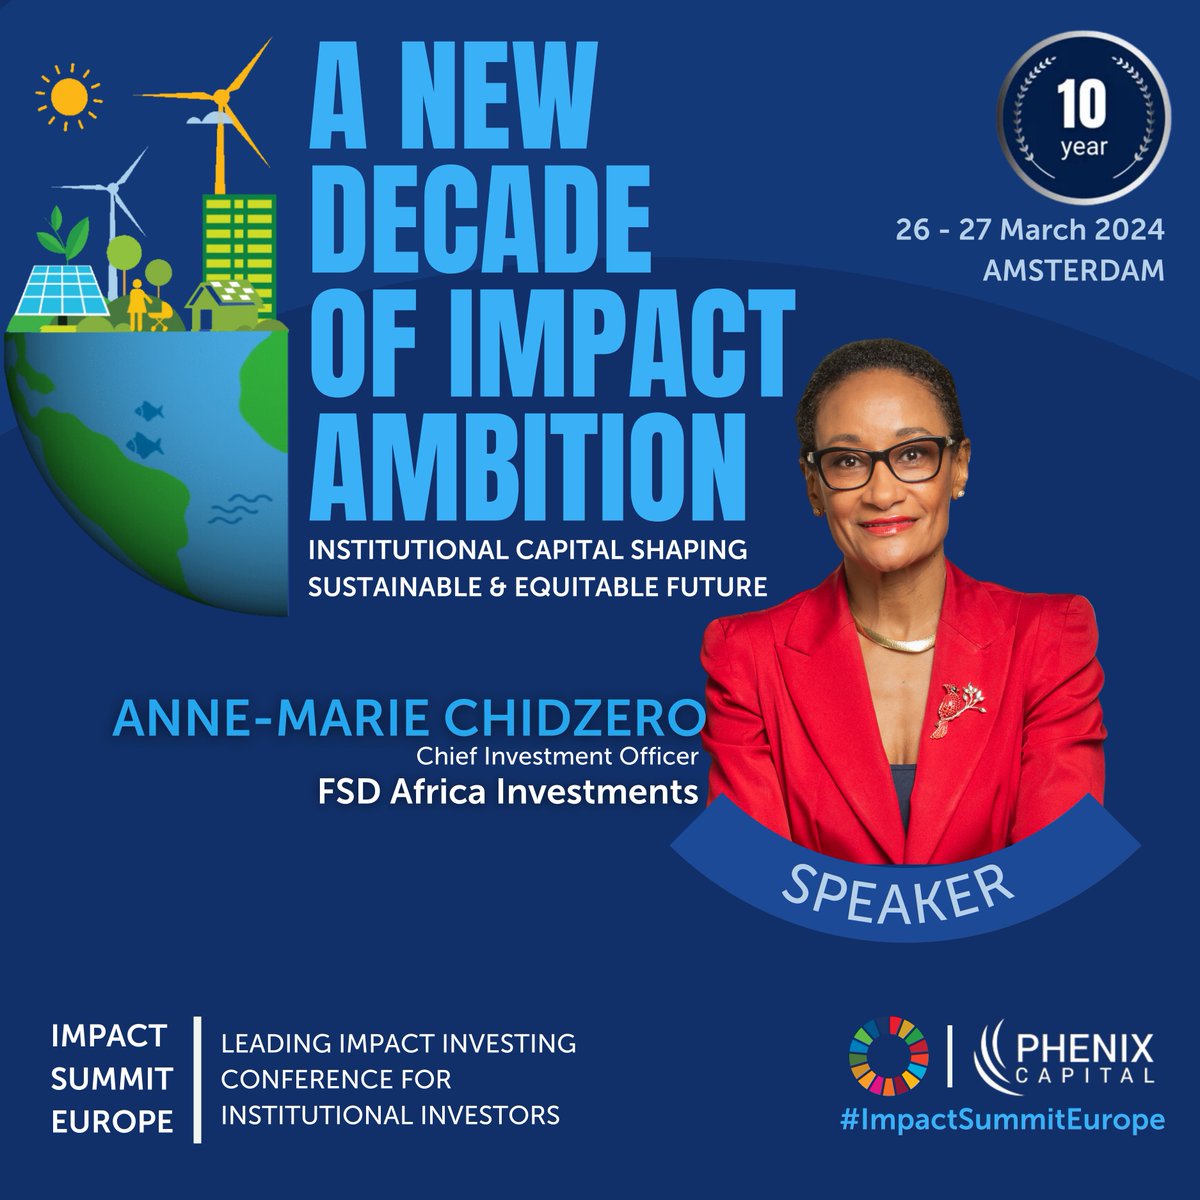 Our CIO, @AMChidzero, will be speaking at the #ImpactSummitEurope by @phoenixcapitalgroup in Amsterdam, March 27! She'll join a panel on 'Where is capital needed for an effective energy transition?' alongside experts to explore key investment strategies & partnerships for…